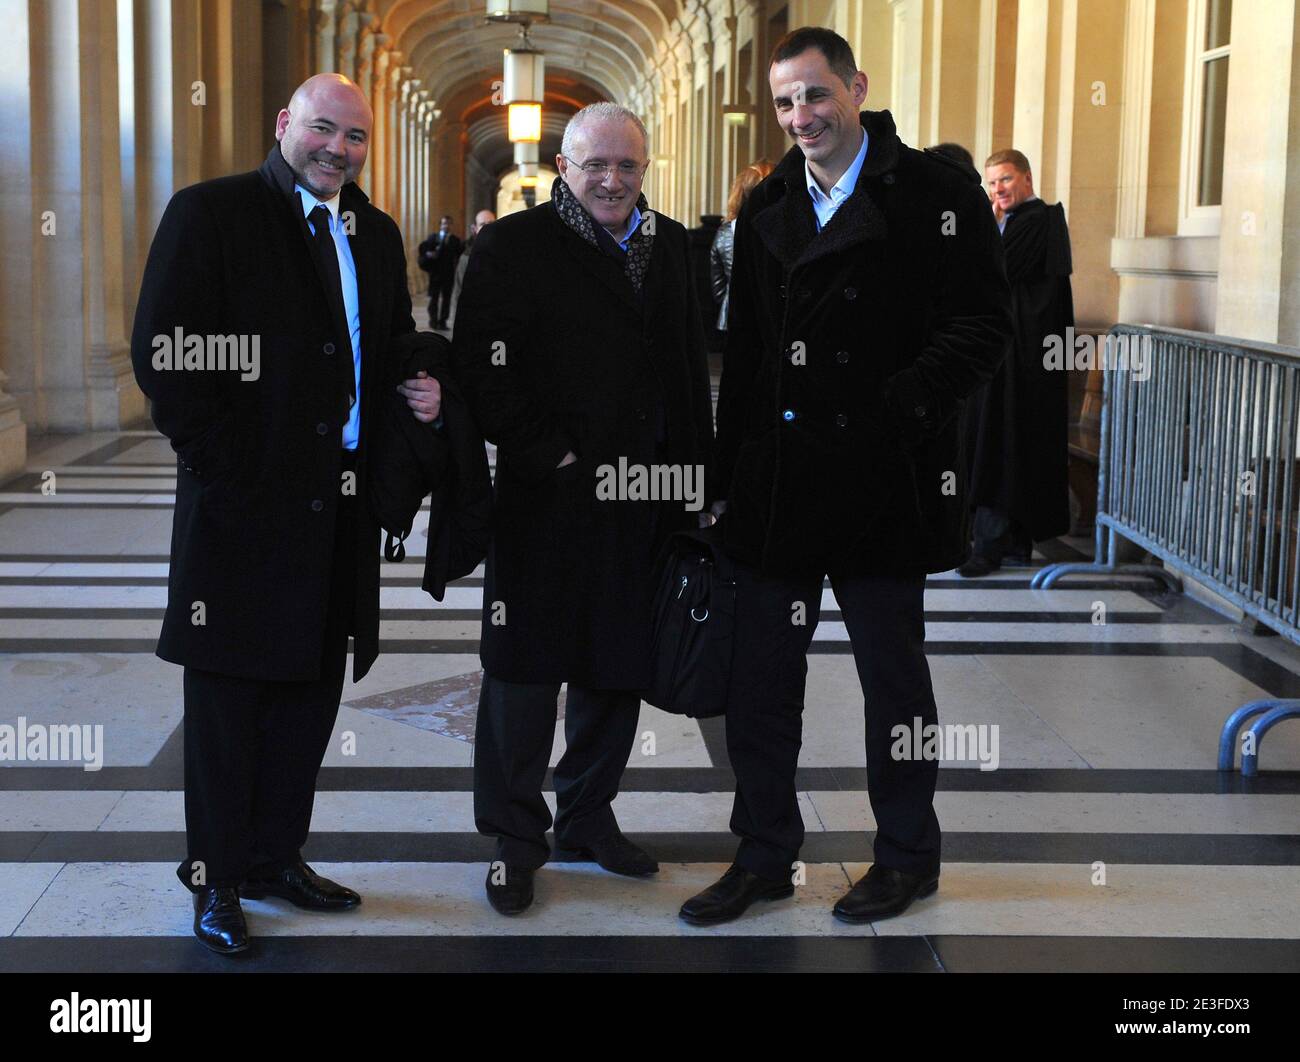 Yvan Colonna's laywers Pascal Garbarini, Antoine Sollacaro and Gilles Simeoni pose at the Paris courthouse to attend the Yvan Colonna Trial, in Paris, France, on March 6, 2009. Photo by Mousse/ABACAPRESS.COMat the Paris courthouse to attend the Yvan Colonna Trial, in Paris, France, on March 6, 2009. Photo by Mousse/ABACAPRESS.COM Stock Photo